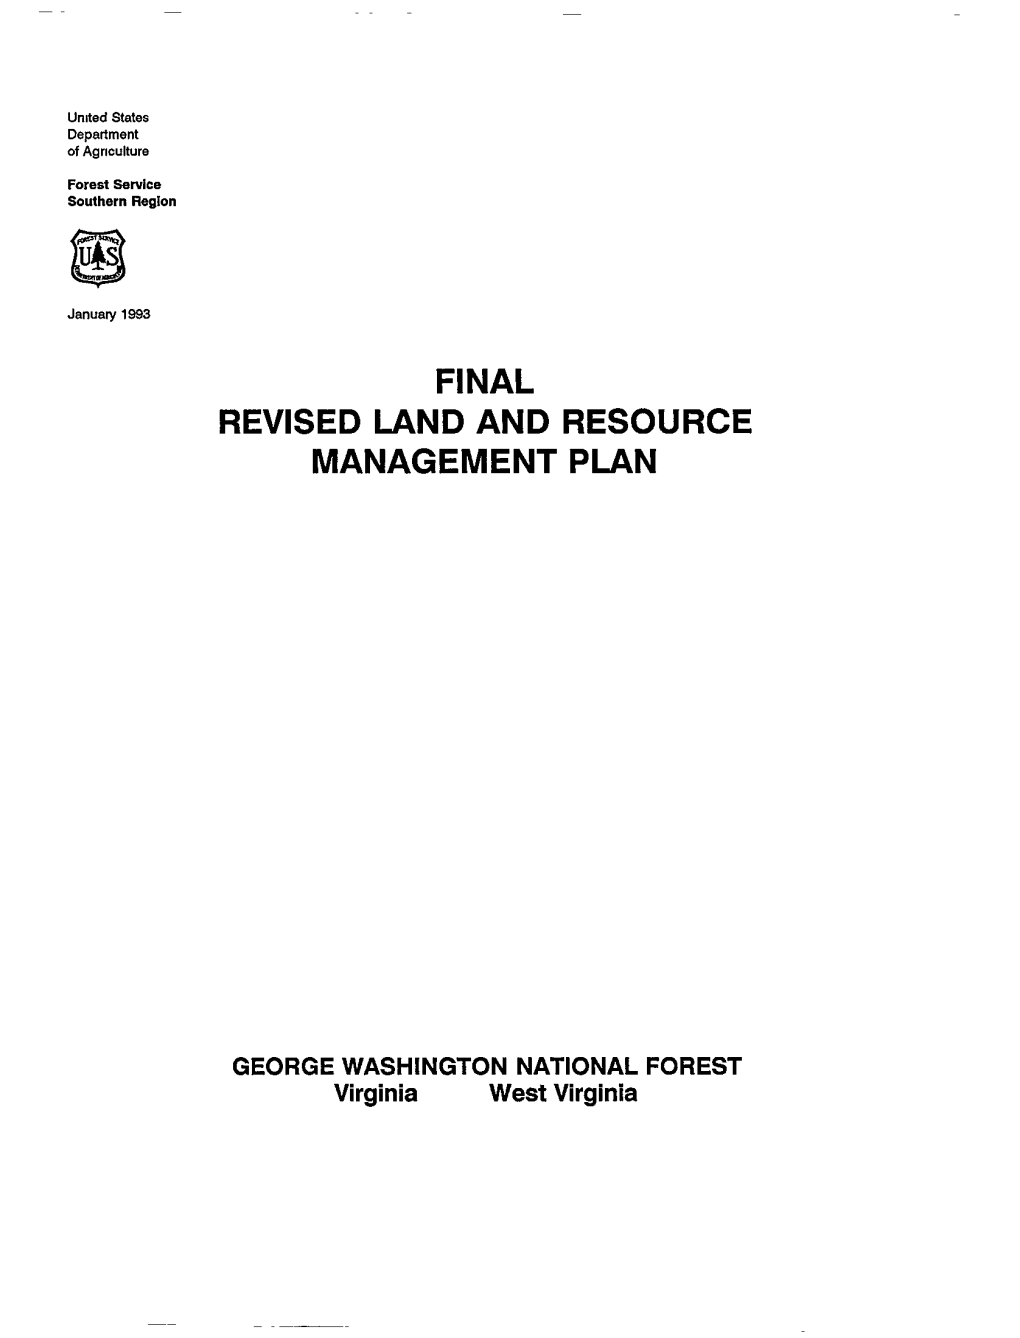 Final Revised Land and Resource Management Plan